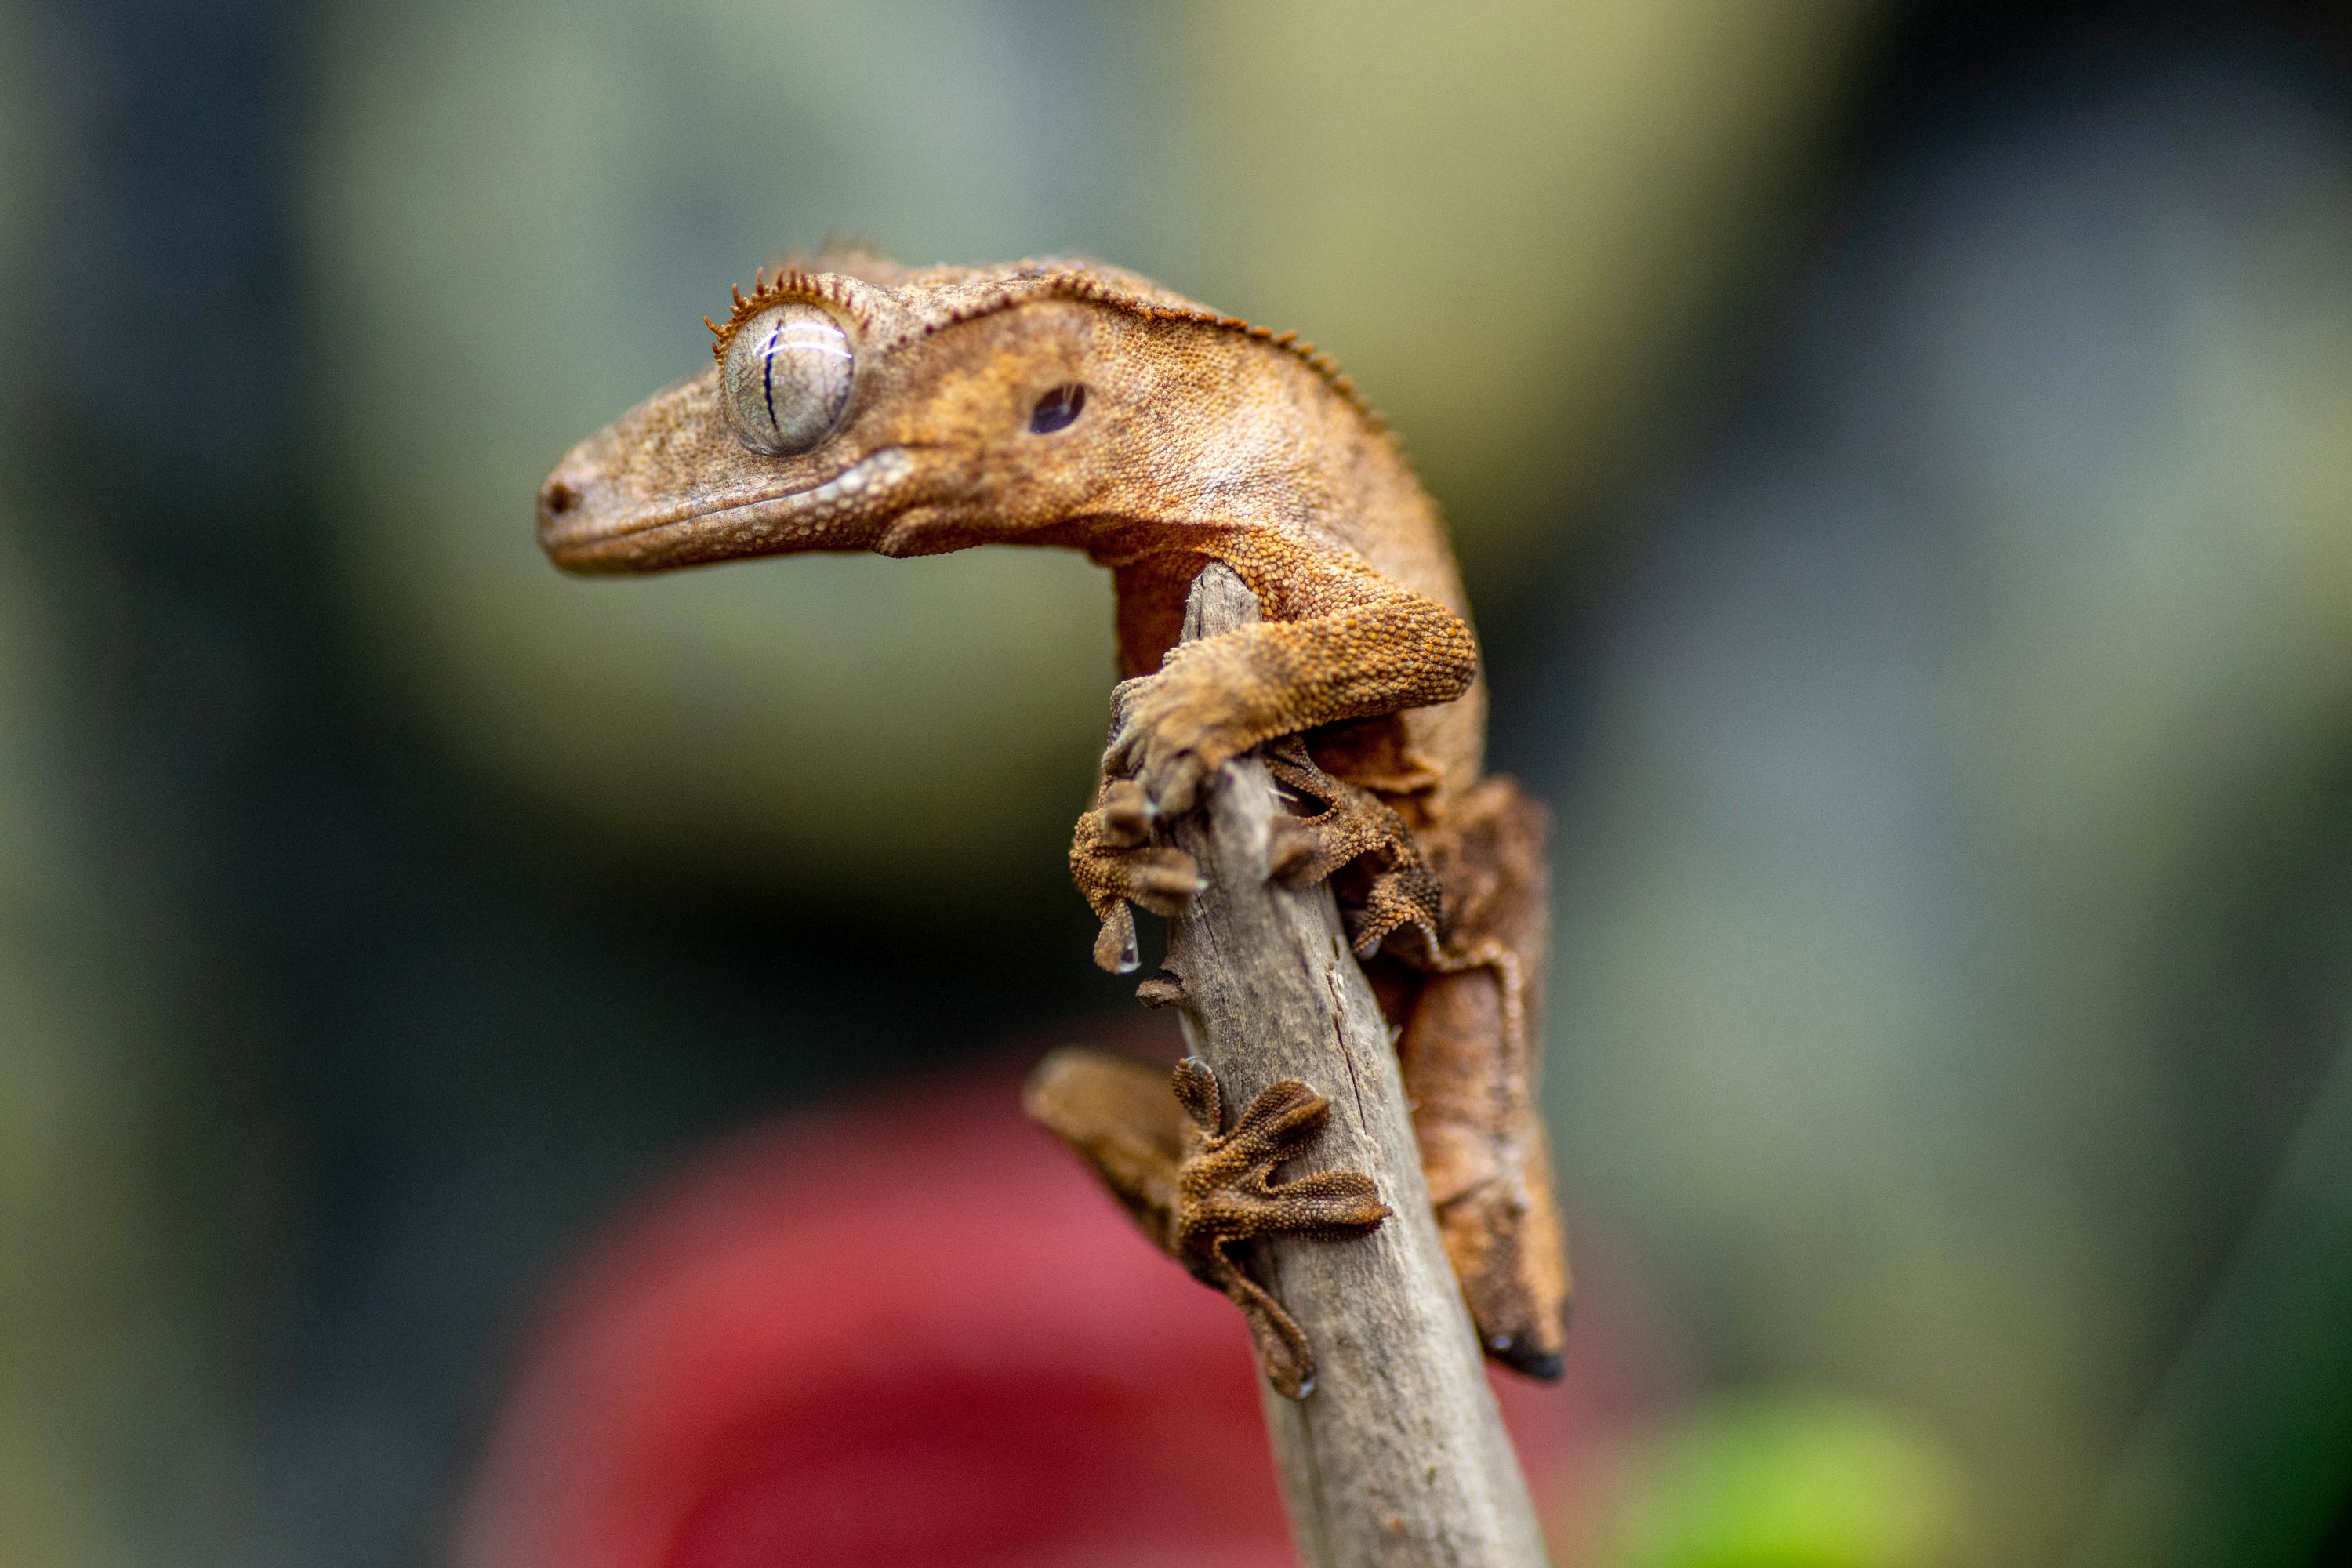 Are Crested Geckos Good Pets?